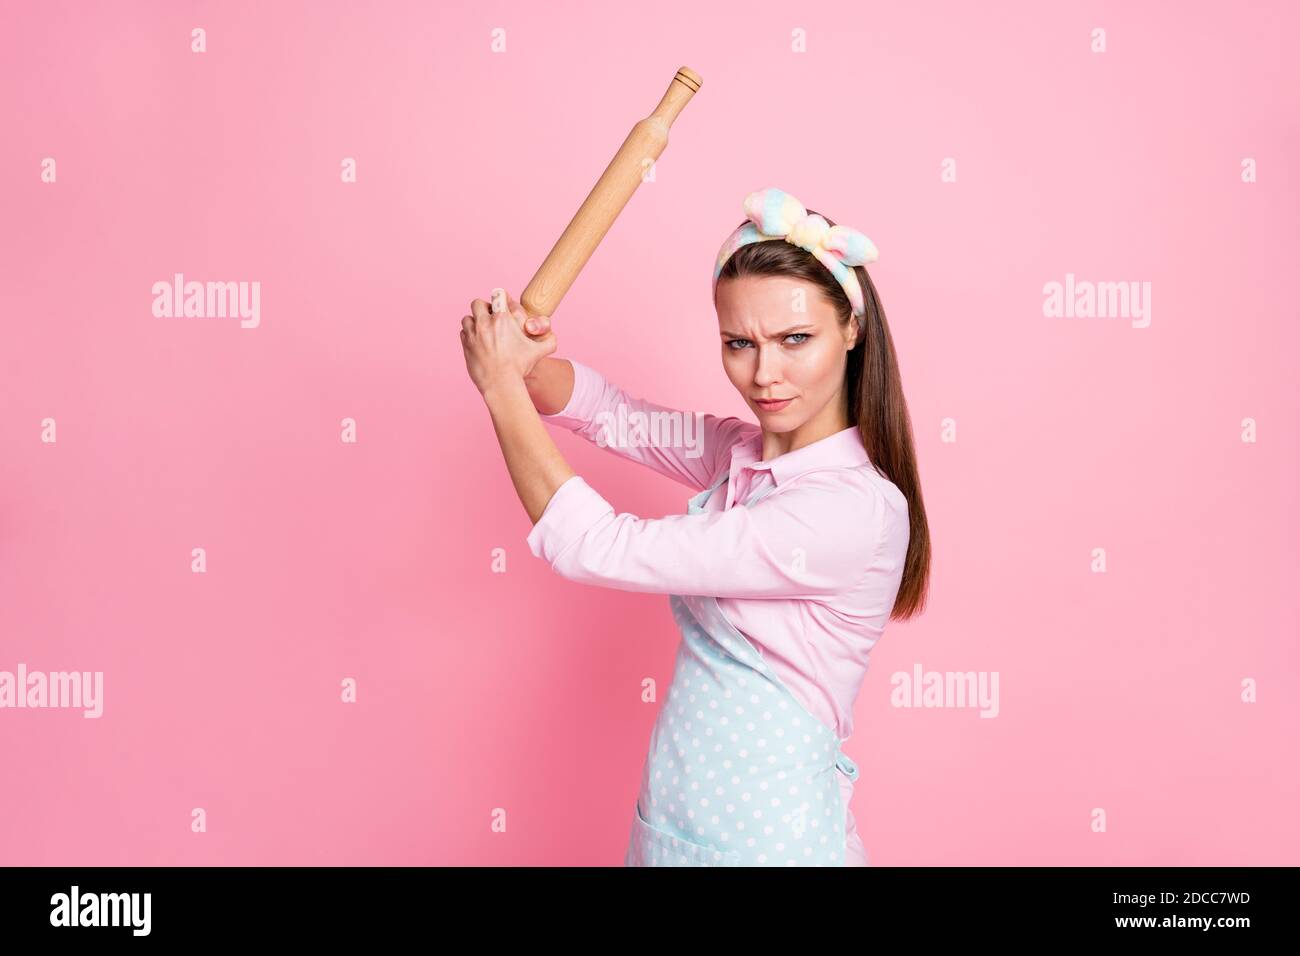 Portrait of her she nice attractive dangerous mad serious housewife holding in hands rolling pin threatening fighting rights gender equality isolated Stock Photo